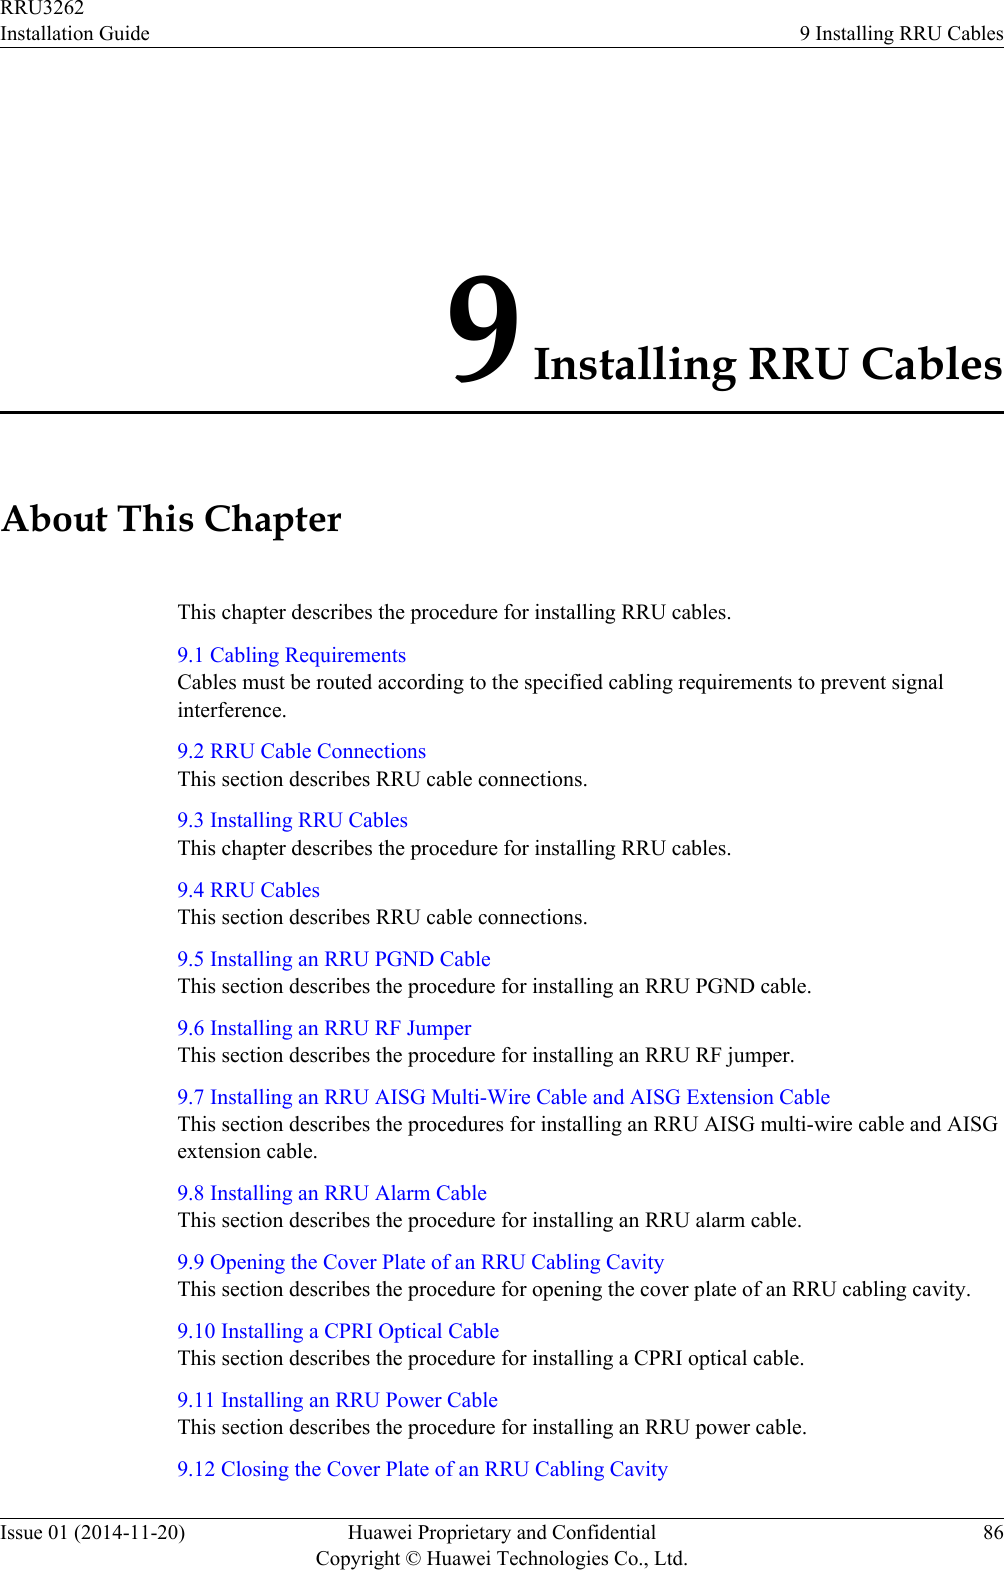 9 Installing RRU CablesAbout This ChapterThis chapter describes the procedure for installing RRU cables.9.1 Cabling RequirementsCables must be routed according to the specified cabling requirements to prevent signalinterference.9.2 RRU Cable ConnectionsThis section describes RRU cable connections.9.3 Installing RRU CablesThis chapter describes the procedure for installing RRU cables.9.4 RRU CablesThis section describes RRU cable connections.9.5 Installing an RRU PGND CableThis section describes the procedure for installing an RRU PGND cable.9.6 Installing an RRU RF JumperThis section describes the procedure for installing an RRU RF jumper.9.7 Installing an RRU AISG Multi-Wire Cable and AISG Extension CableThis section describes the procedures for installing an RRU AISG multi-wire cable and AISGextension cable.9.8 Installing an RRU Alarm CableThis section describes the procedure for installing an RRU alarm cable.9.9 Opening the Cover Plate of an RRU Cabling CavityThis section describes the procedure for opening the cover plate of an RRU cabling cavity.9.10 Installing a CPRI Optical CableThis section describes the procedure for installing a CPRI optical cable.9.11 Installing an RRU Power CableThis section describes the procedure for installing an RRU power cable.9.12 Closing the Cover Plate of an RRU Cabling CavityRRU3262Installation Guide 9 Installing RRU CablesIssue 01 (2014-11-20) Huawei Proprietary and ConfidentialCopyright © Huawei Technologies Co., Ltd.86